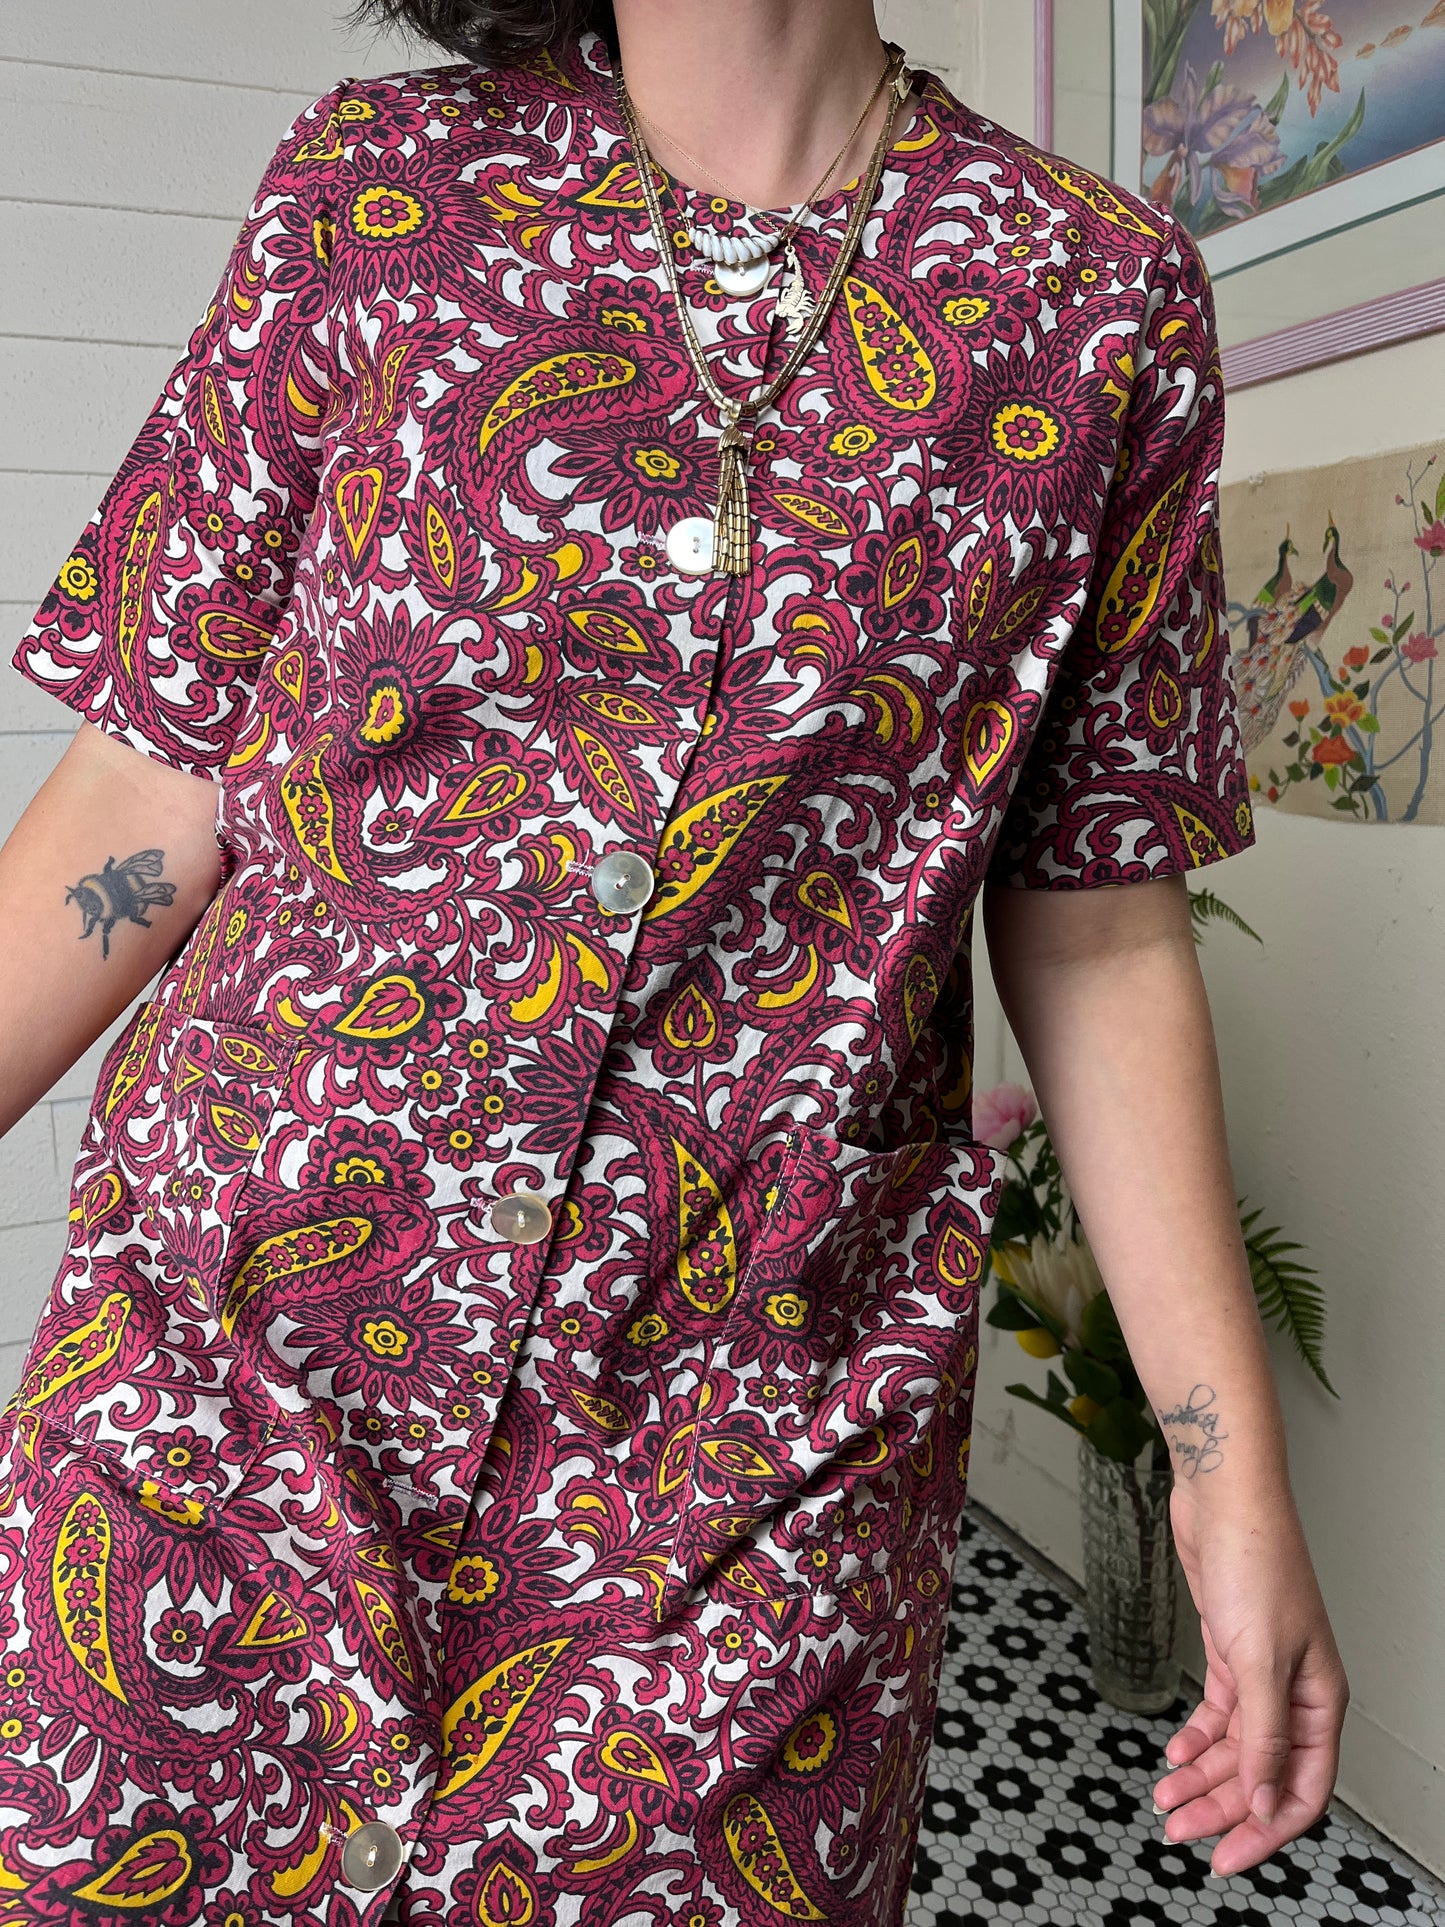 1960s PSYCHEDELIC PRINT SHORT SLEEVE A LINE SHIFT DRESS PAISLEY PRINT - medium to large